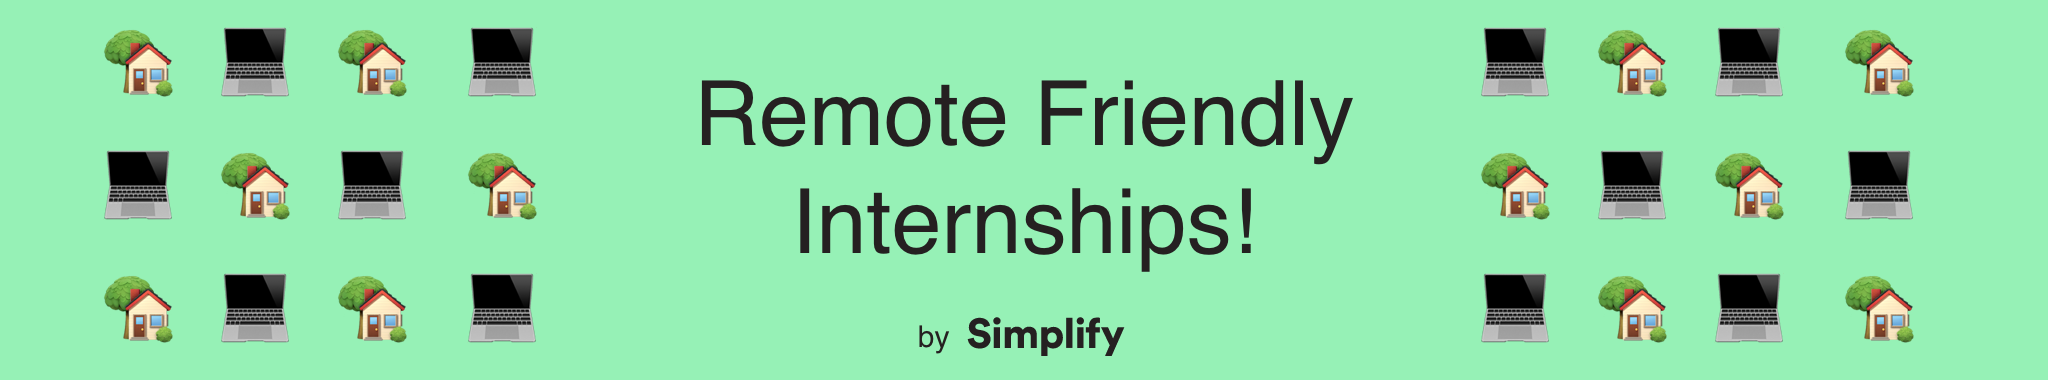 text that says “Remote Friendly Internships by Simplify” surrounded by computer and home emojis